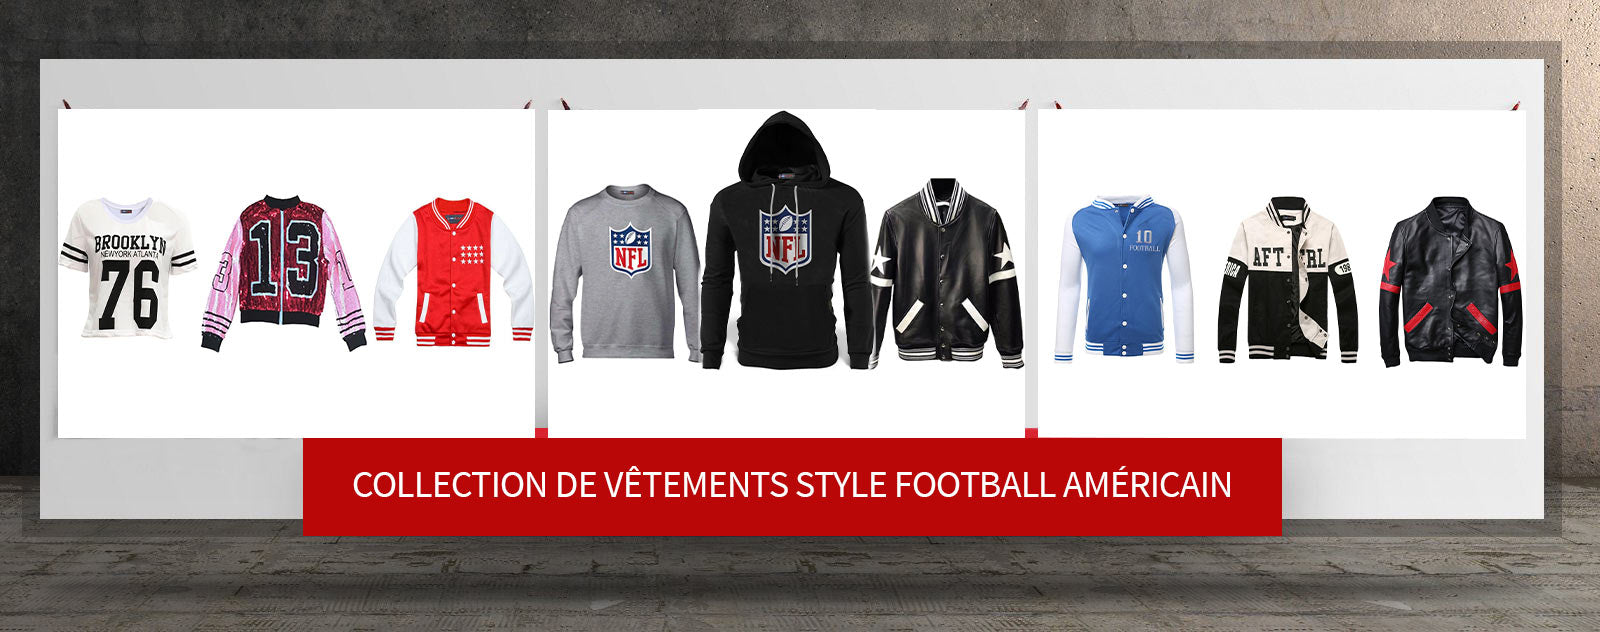 collection vetements style football americain